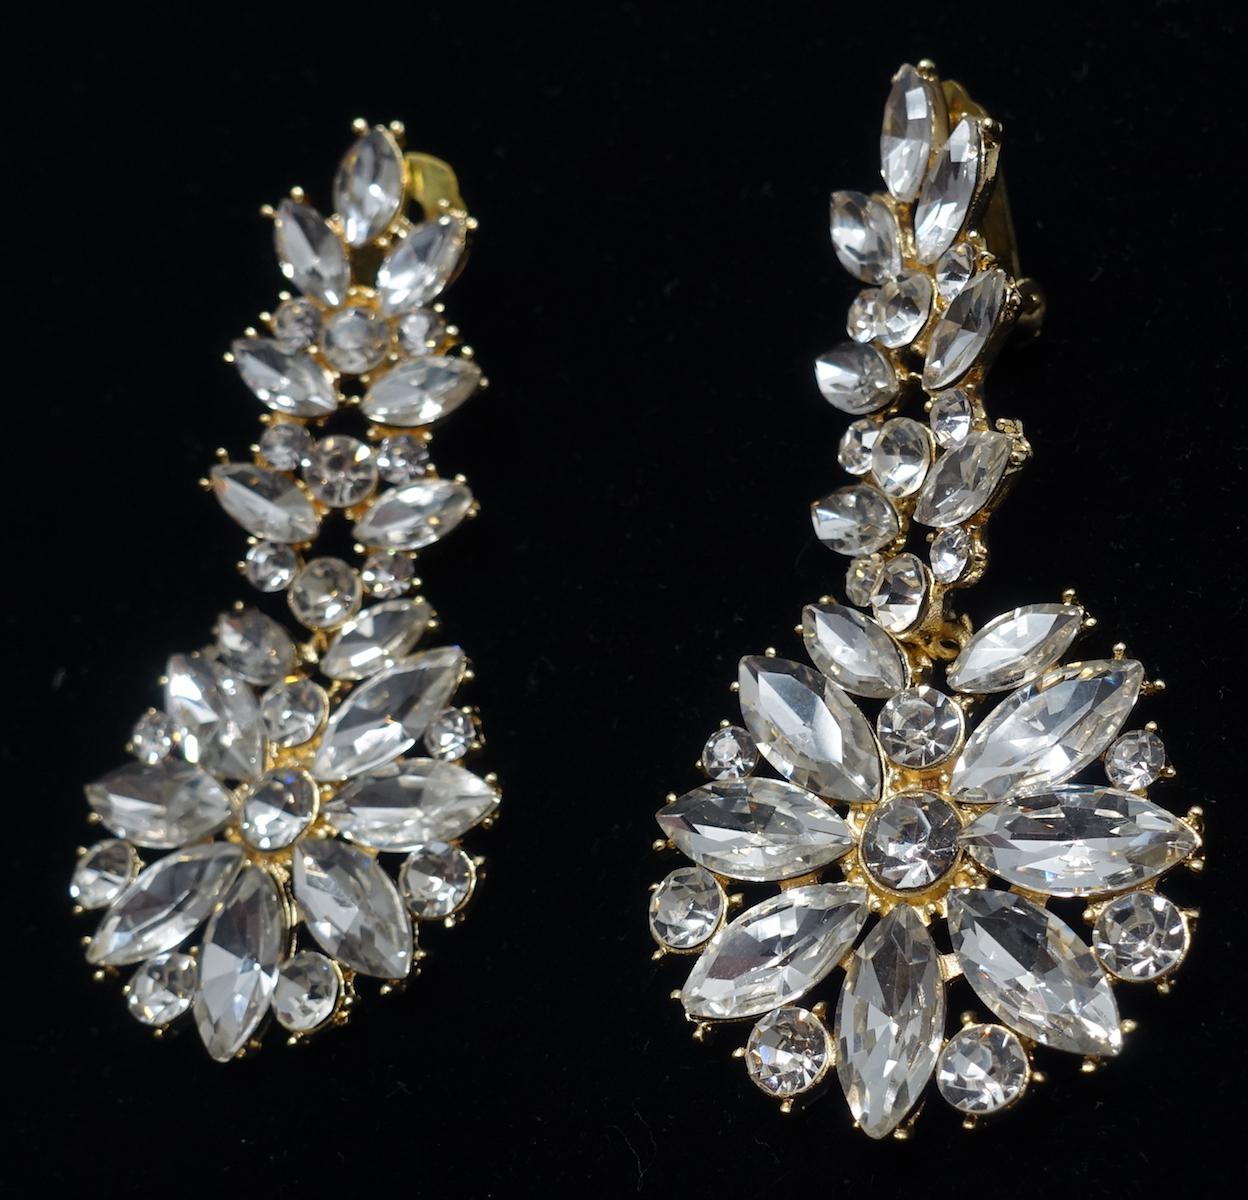 These vintage signed DeMario dangling earrings have clear crystals on top with crystals forming a circle on the bottom in a gold tone setting.  In excellent condition, these clip earrings measure 3” x 1-1/4” and are signed “DeMario”.